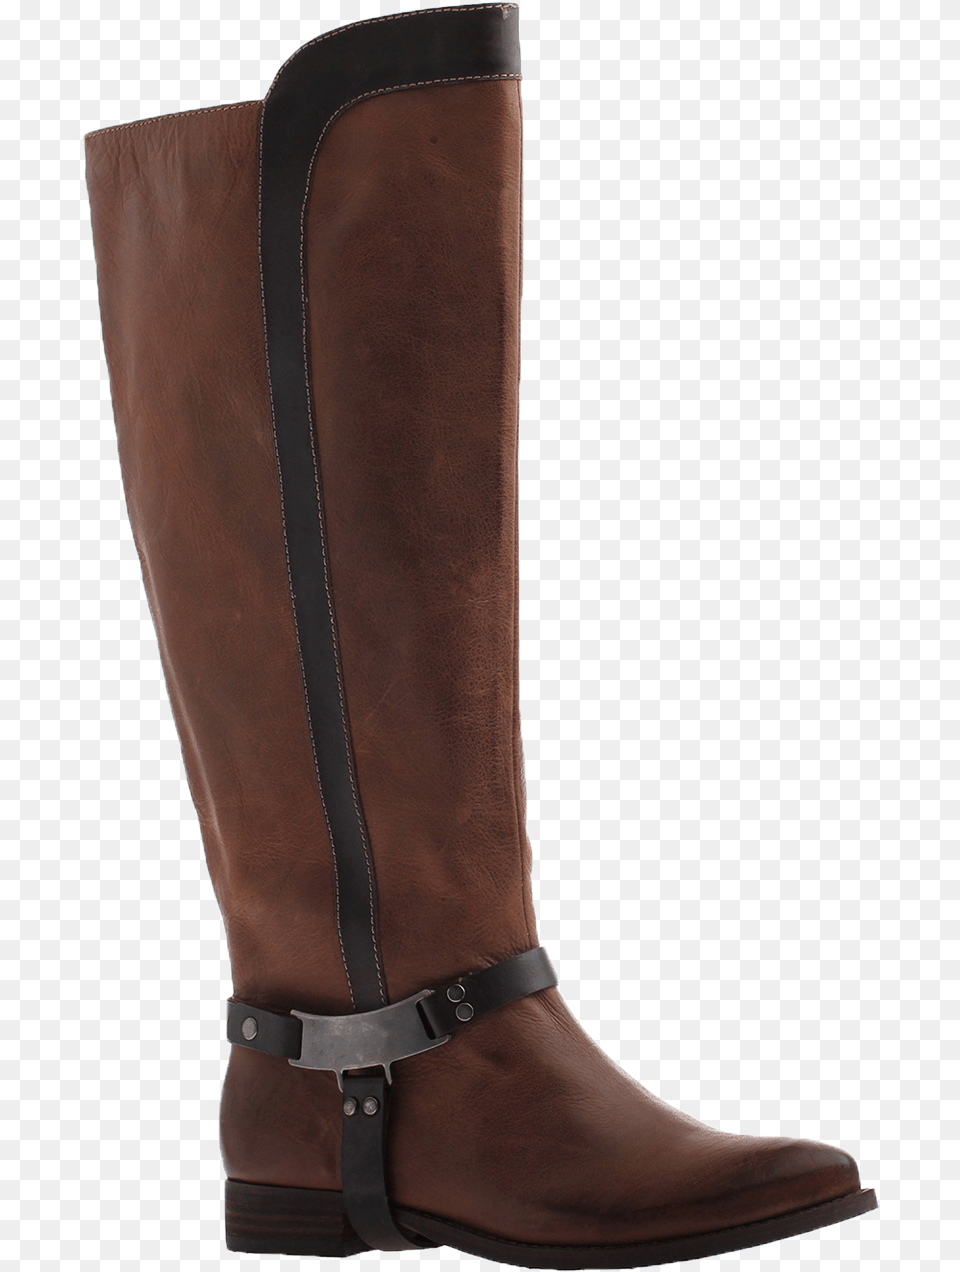 Kali In Dark Brown Knee High Boots Timberland Stivali Alti Donna, Boot, Clothing, Footwear, Riding Boot Free Png